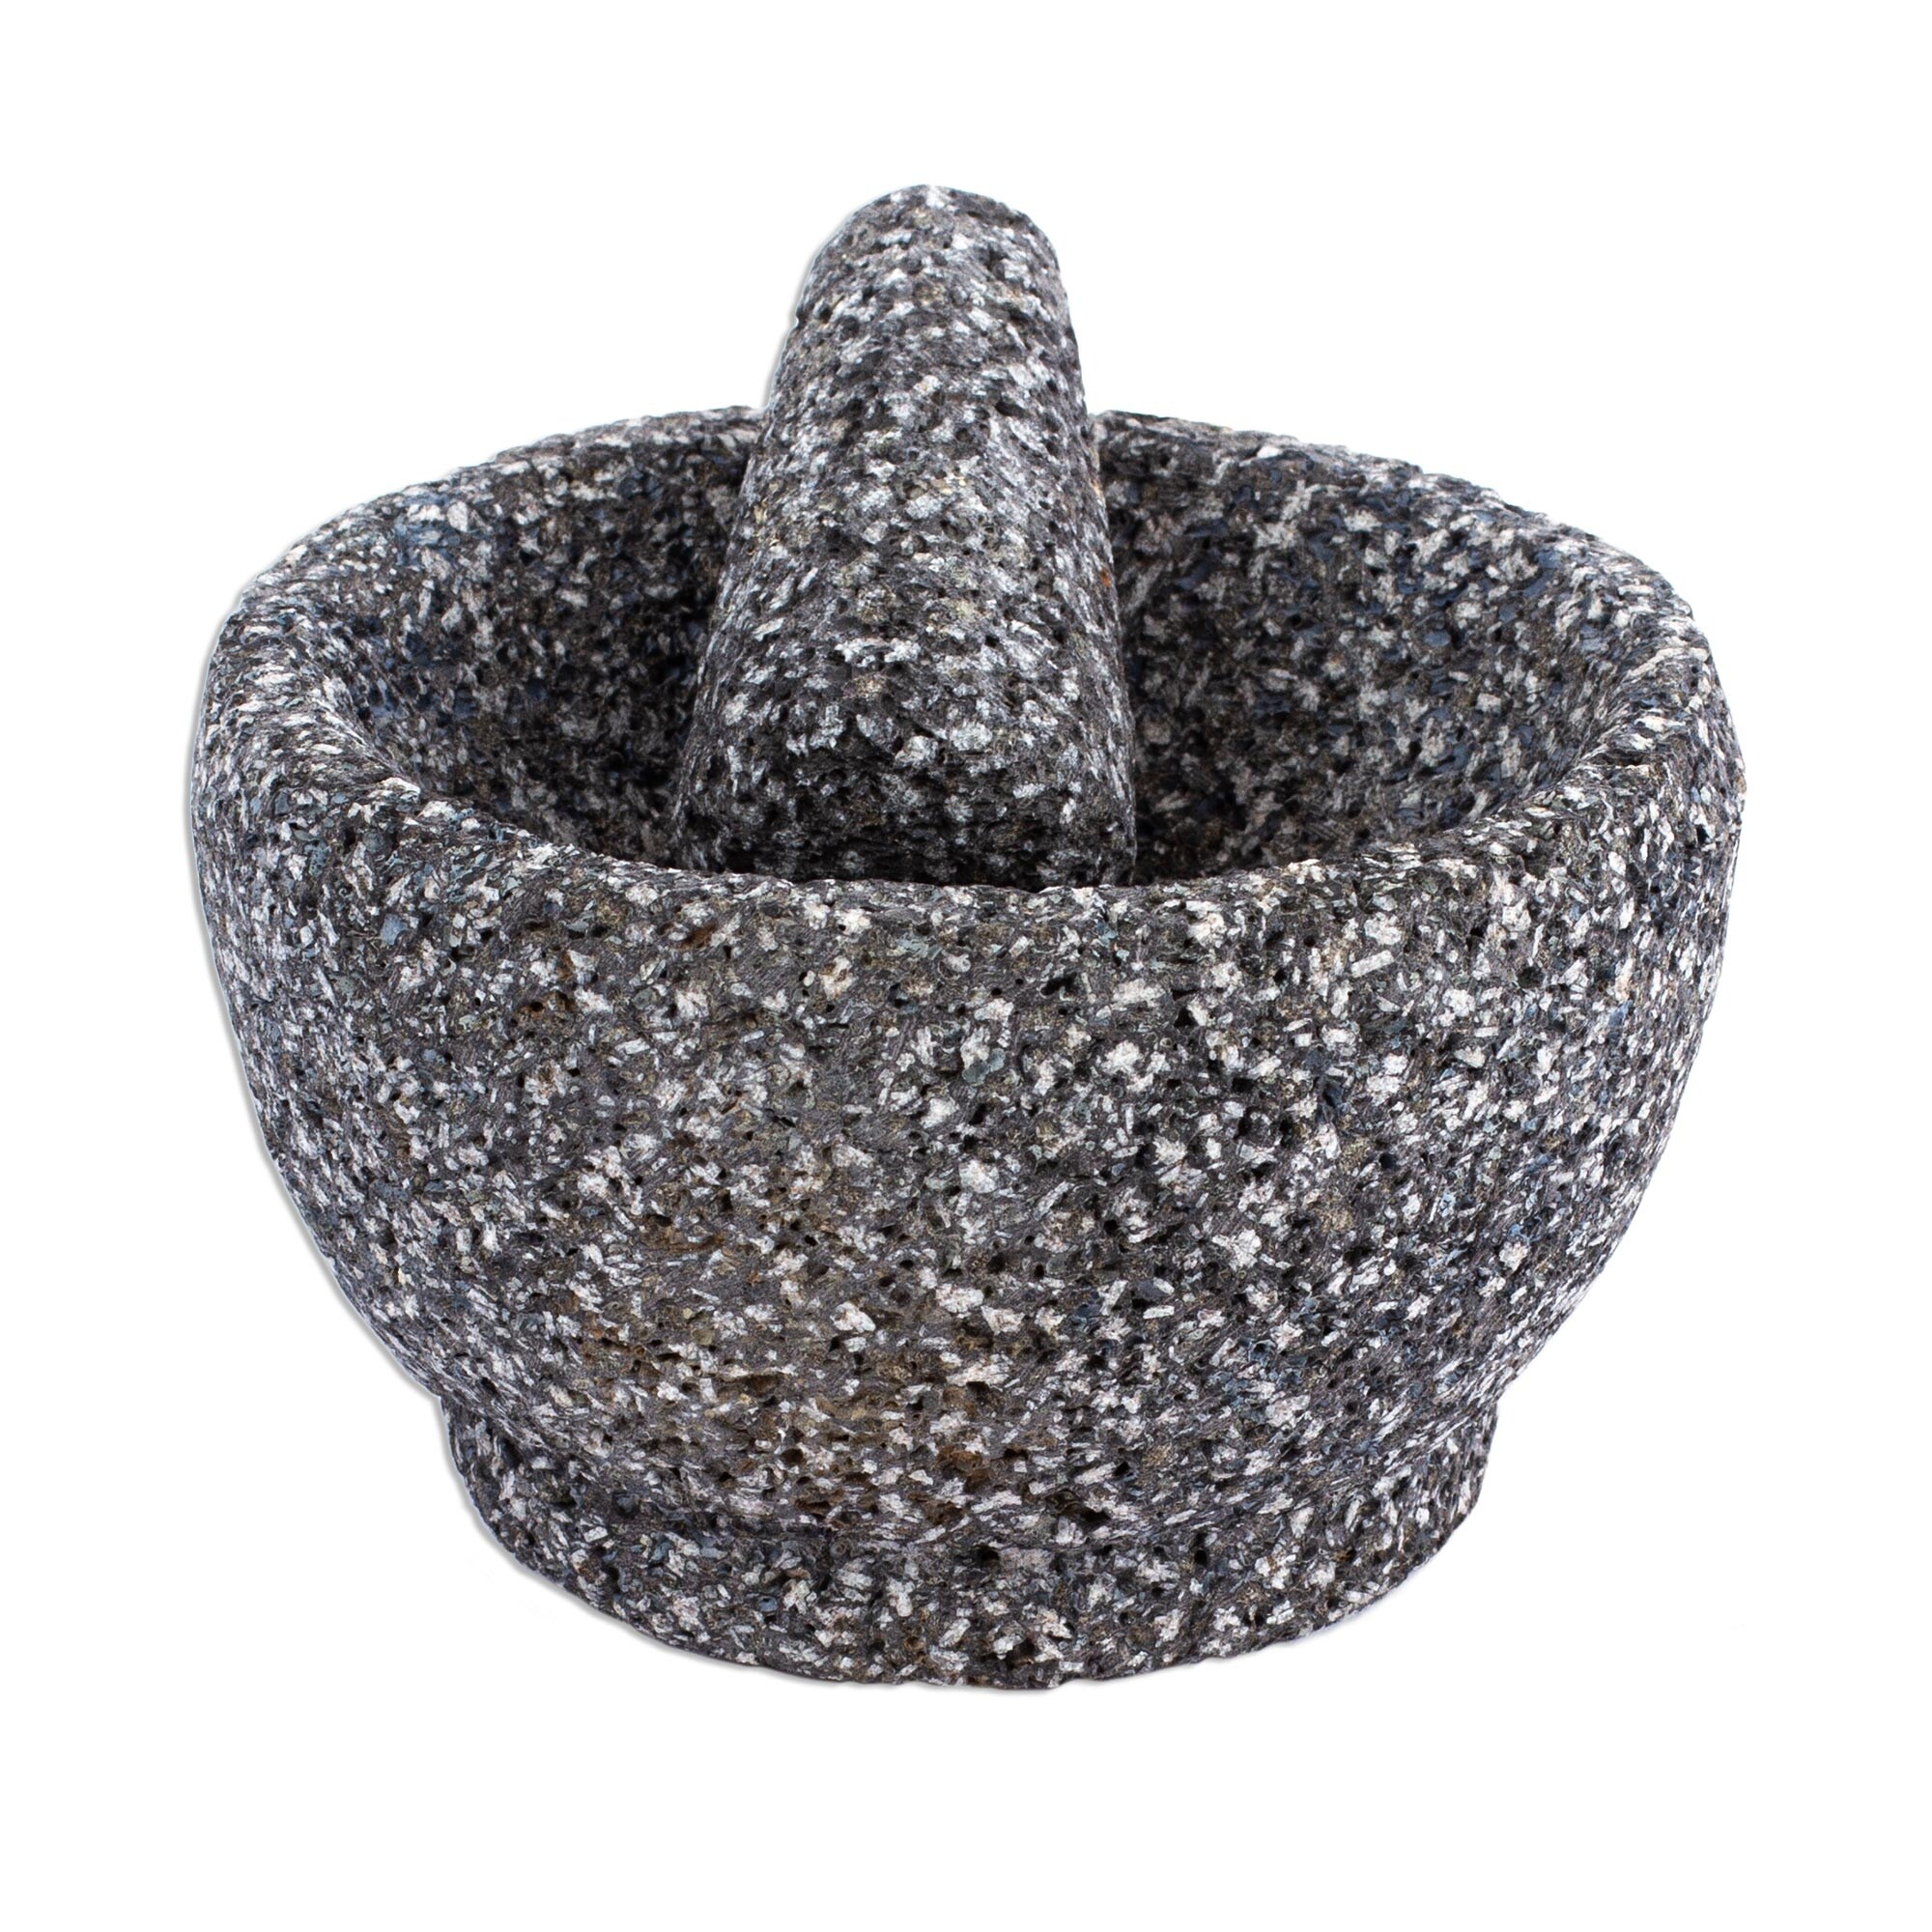 Traditional Basalt Molcajete from Mexico (9 inch), 'Grand Tradition